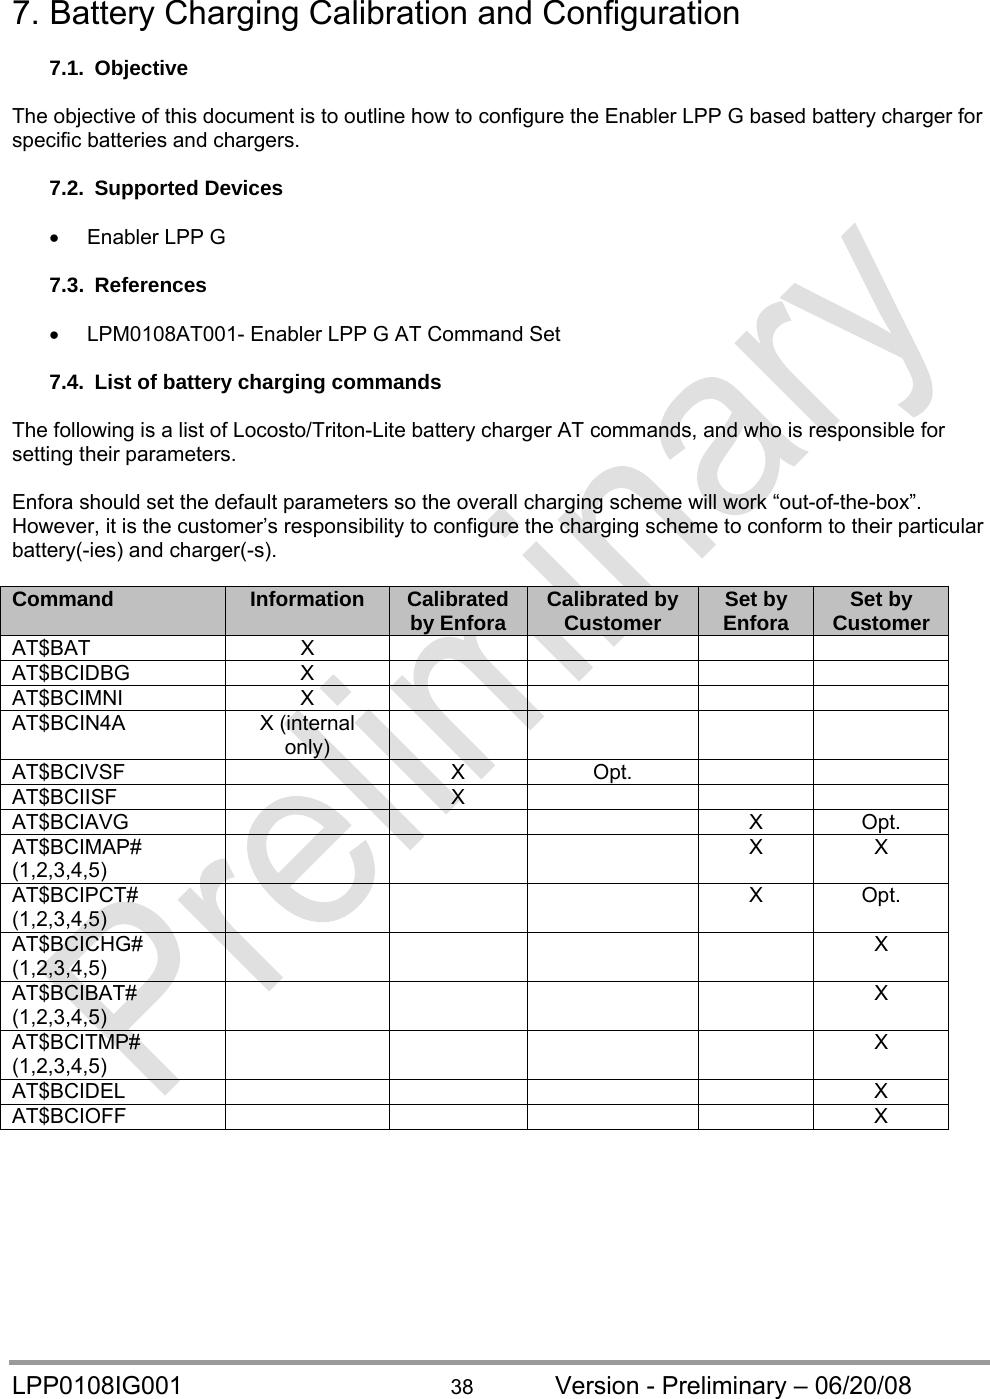  LPP0108IG001  38  Version - Preliminary – 06/20/08 7. Battery Charging Calibration and Configuration  7.1. Objective  The objective of this document is to outline how to configure the Enabler LPP G based battery charger for specific batteries and chargers.  7.2. Supported Devices    Enabler LPP G  7.3. References    LPM0108AT001- Enabler LPP G AT Command Set  7.4.  List of battery charging commands  The following is a list of Locosto/Triton-Lite battery charger AT commands, and who is responsible for setting their parameters.  Enfora should set the default parameters so the overall charging scheme will work “out-of-the-box”. However, it is the customer’s responsibility to configure the charging scheme to conform to their particular battery(-ies) and charger(-s).  Command  Information  Calibrated by Enfora  Calibrated by Customer  Set by Enfora  Set by Customer AT$BAT X      AT$BCIDBG X     AT$BCIMNI X     AT$BCIN4A X (internal only)     AT$BCIVSF  X Opt.   AT$BCIISF  X    AT$BCIAVG    X Opt. AT$BCIMAP# (1,2,3,4,5)     X X AT$BCIPCT# (1,2,3,4,5)     X Opt. AT$BCICHG# (1,2,3,4,5)      X AT$BCIBAT# (1,2,3,4,5)      X AT$BCITMP# (1,2,3,4,5)      X AT$BCIDEL     X AT$BCIOFF     X 